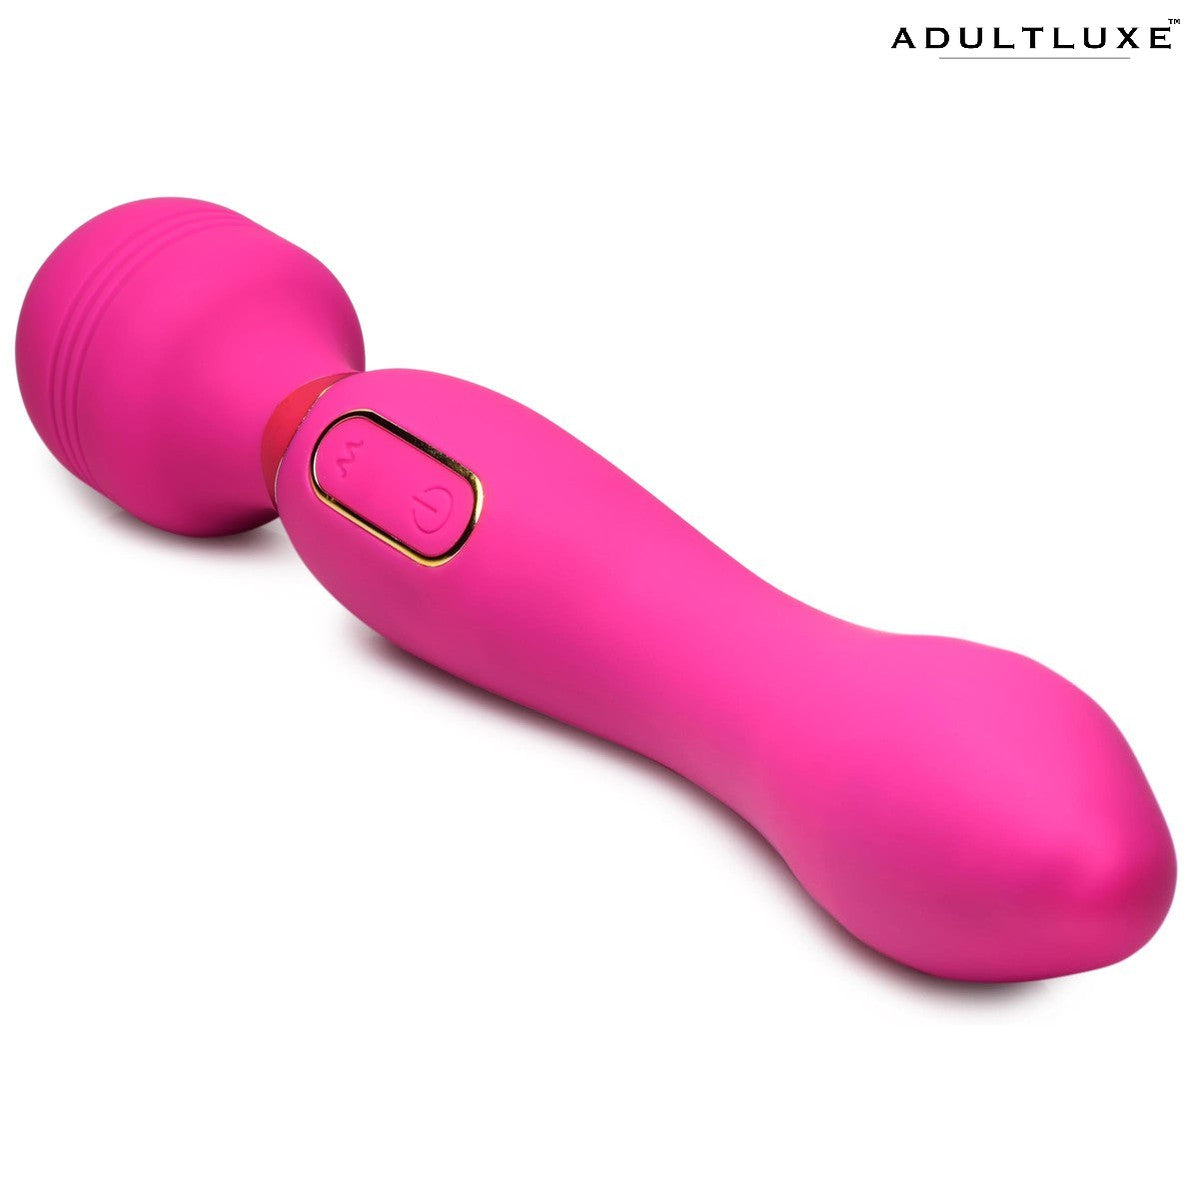 Ultra G-stroke Come Hither Vibrating Silicone Wand